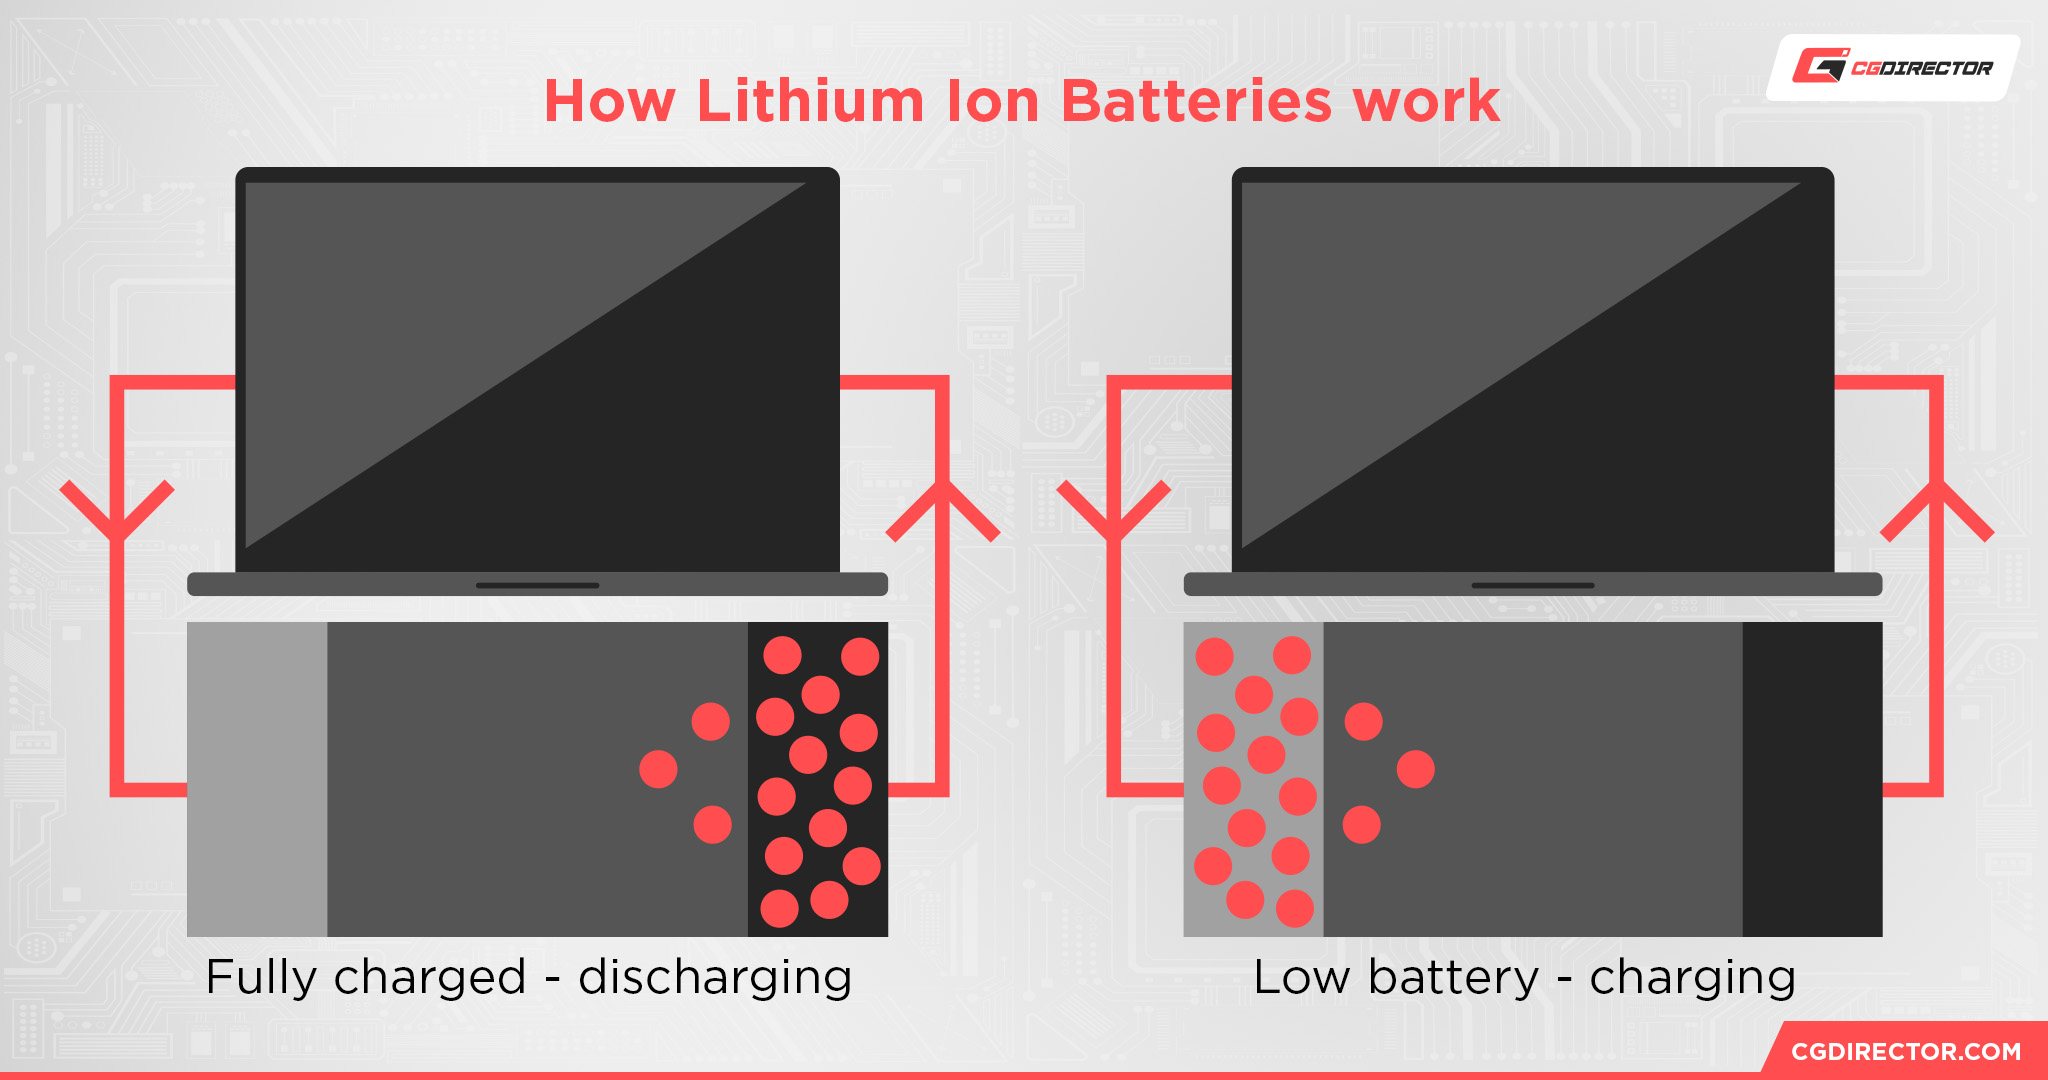 How Lithium Ion Batteries work